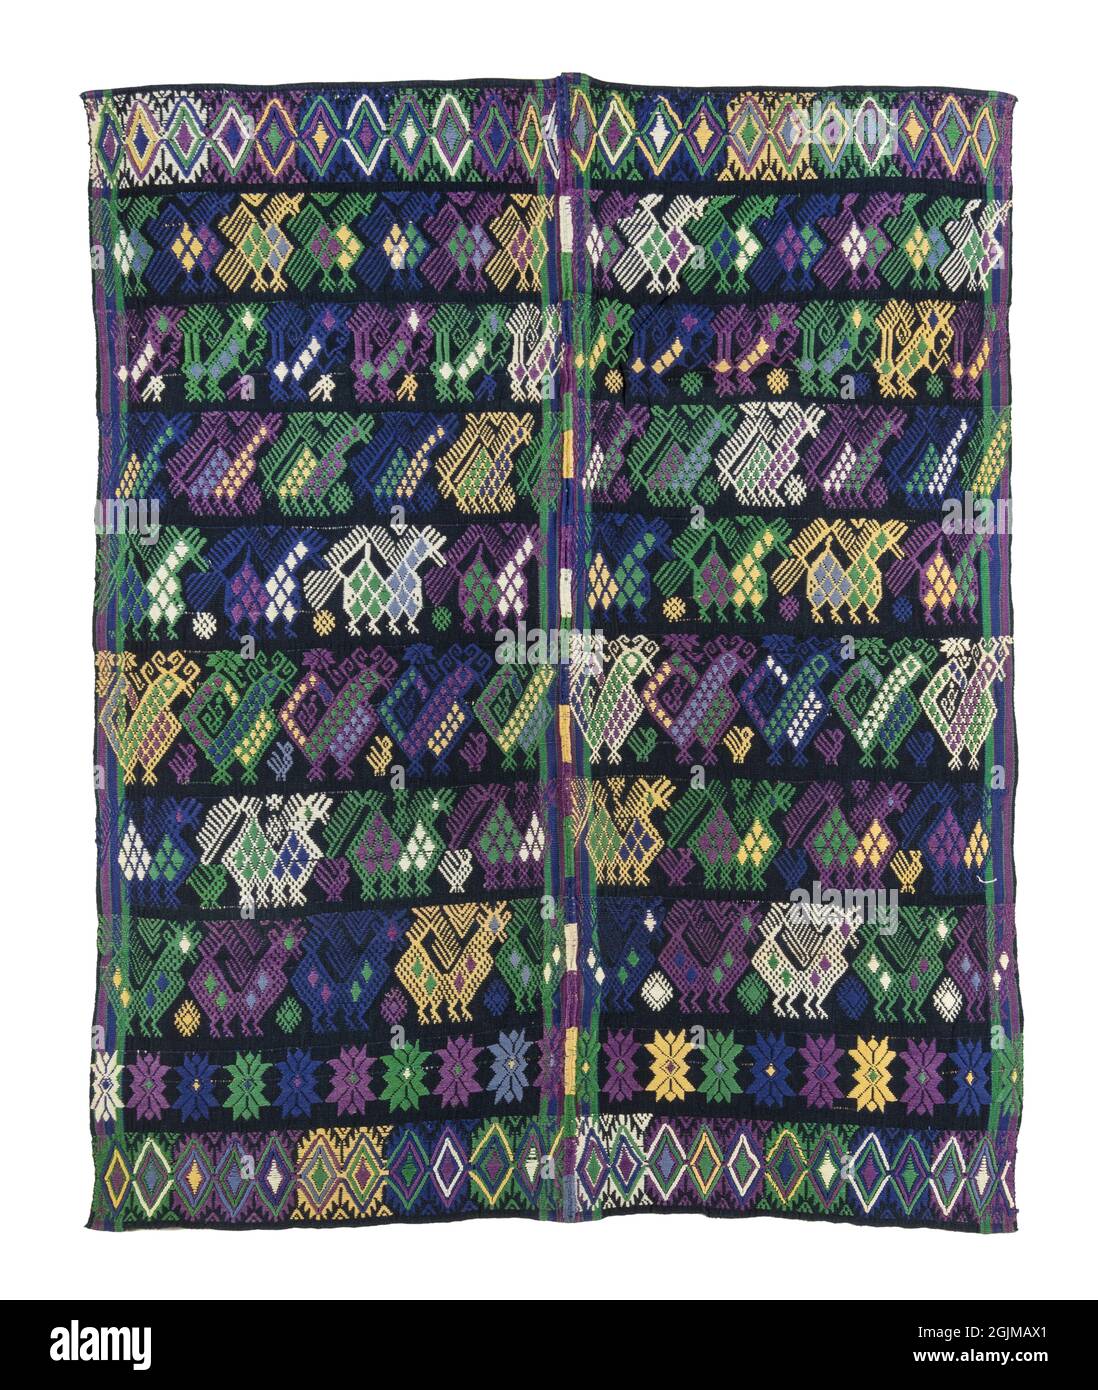 Densely brocaded, handwoven textile from Santa Maria de Jesus Guatemala. Contemporary Guatemalan Maya costume. Used by women not solely in mourning but for daily and ceremonial wear either over the head (for shade), around the shoulders (for warmth), or over the head and hanging down the back (for church); can also be used as a baby carrier or to carry shopping. Stock Photo